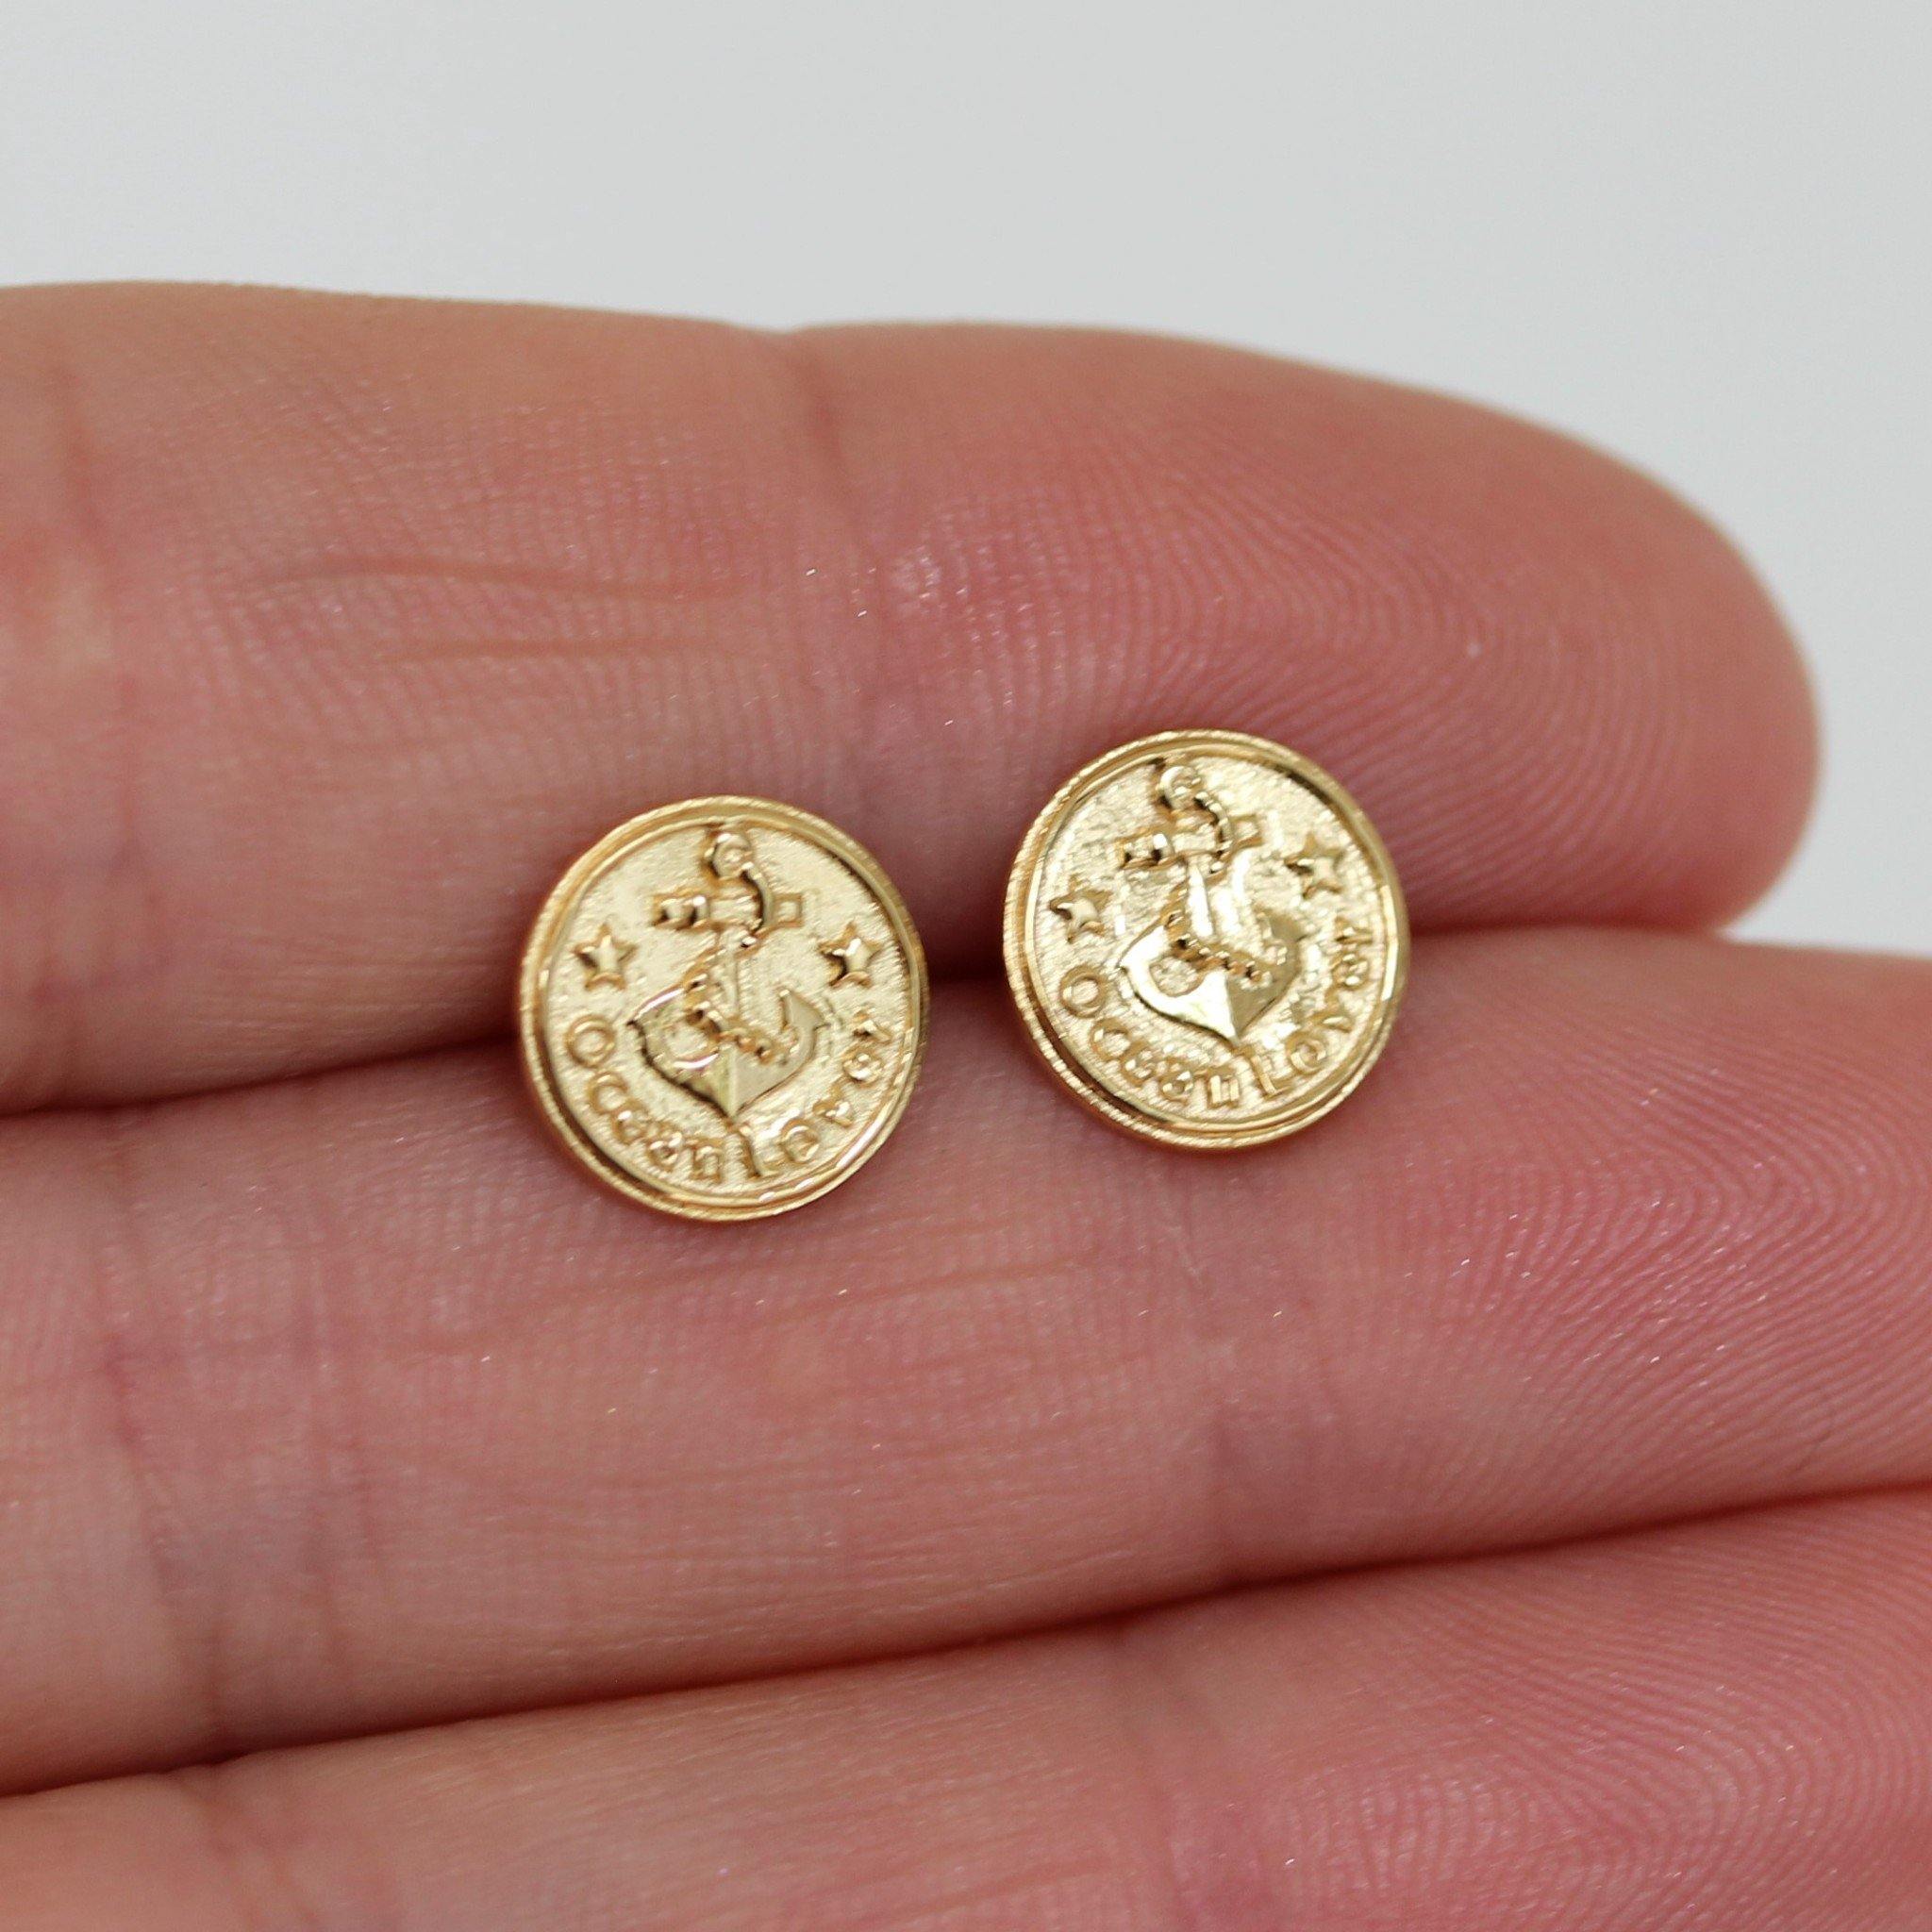 10mm Round Anchor Medallion Stud Earrings - Yellow Gold Plated Sterling Silver - STERLING SILVER DESIGNS